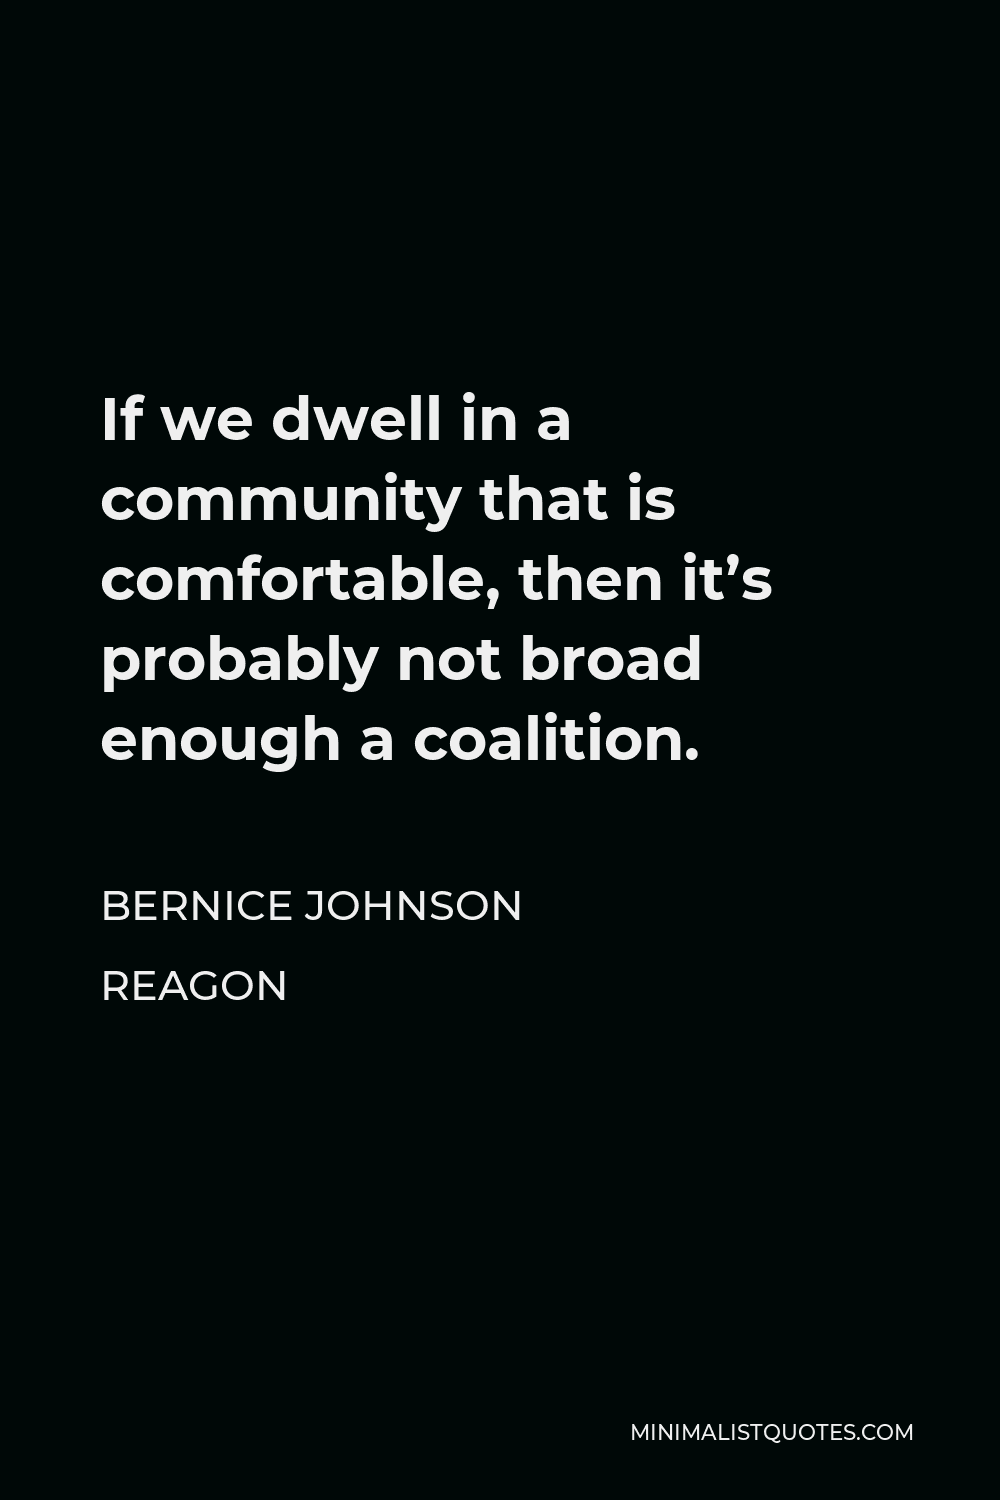 Bernice Johnson Reagon Quote - If we dwell in a community that is comfortable, then it’s probably not broad enough a coalition.